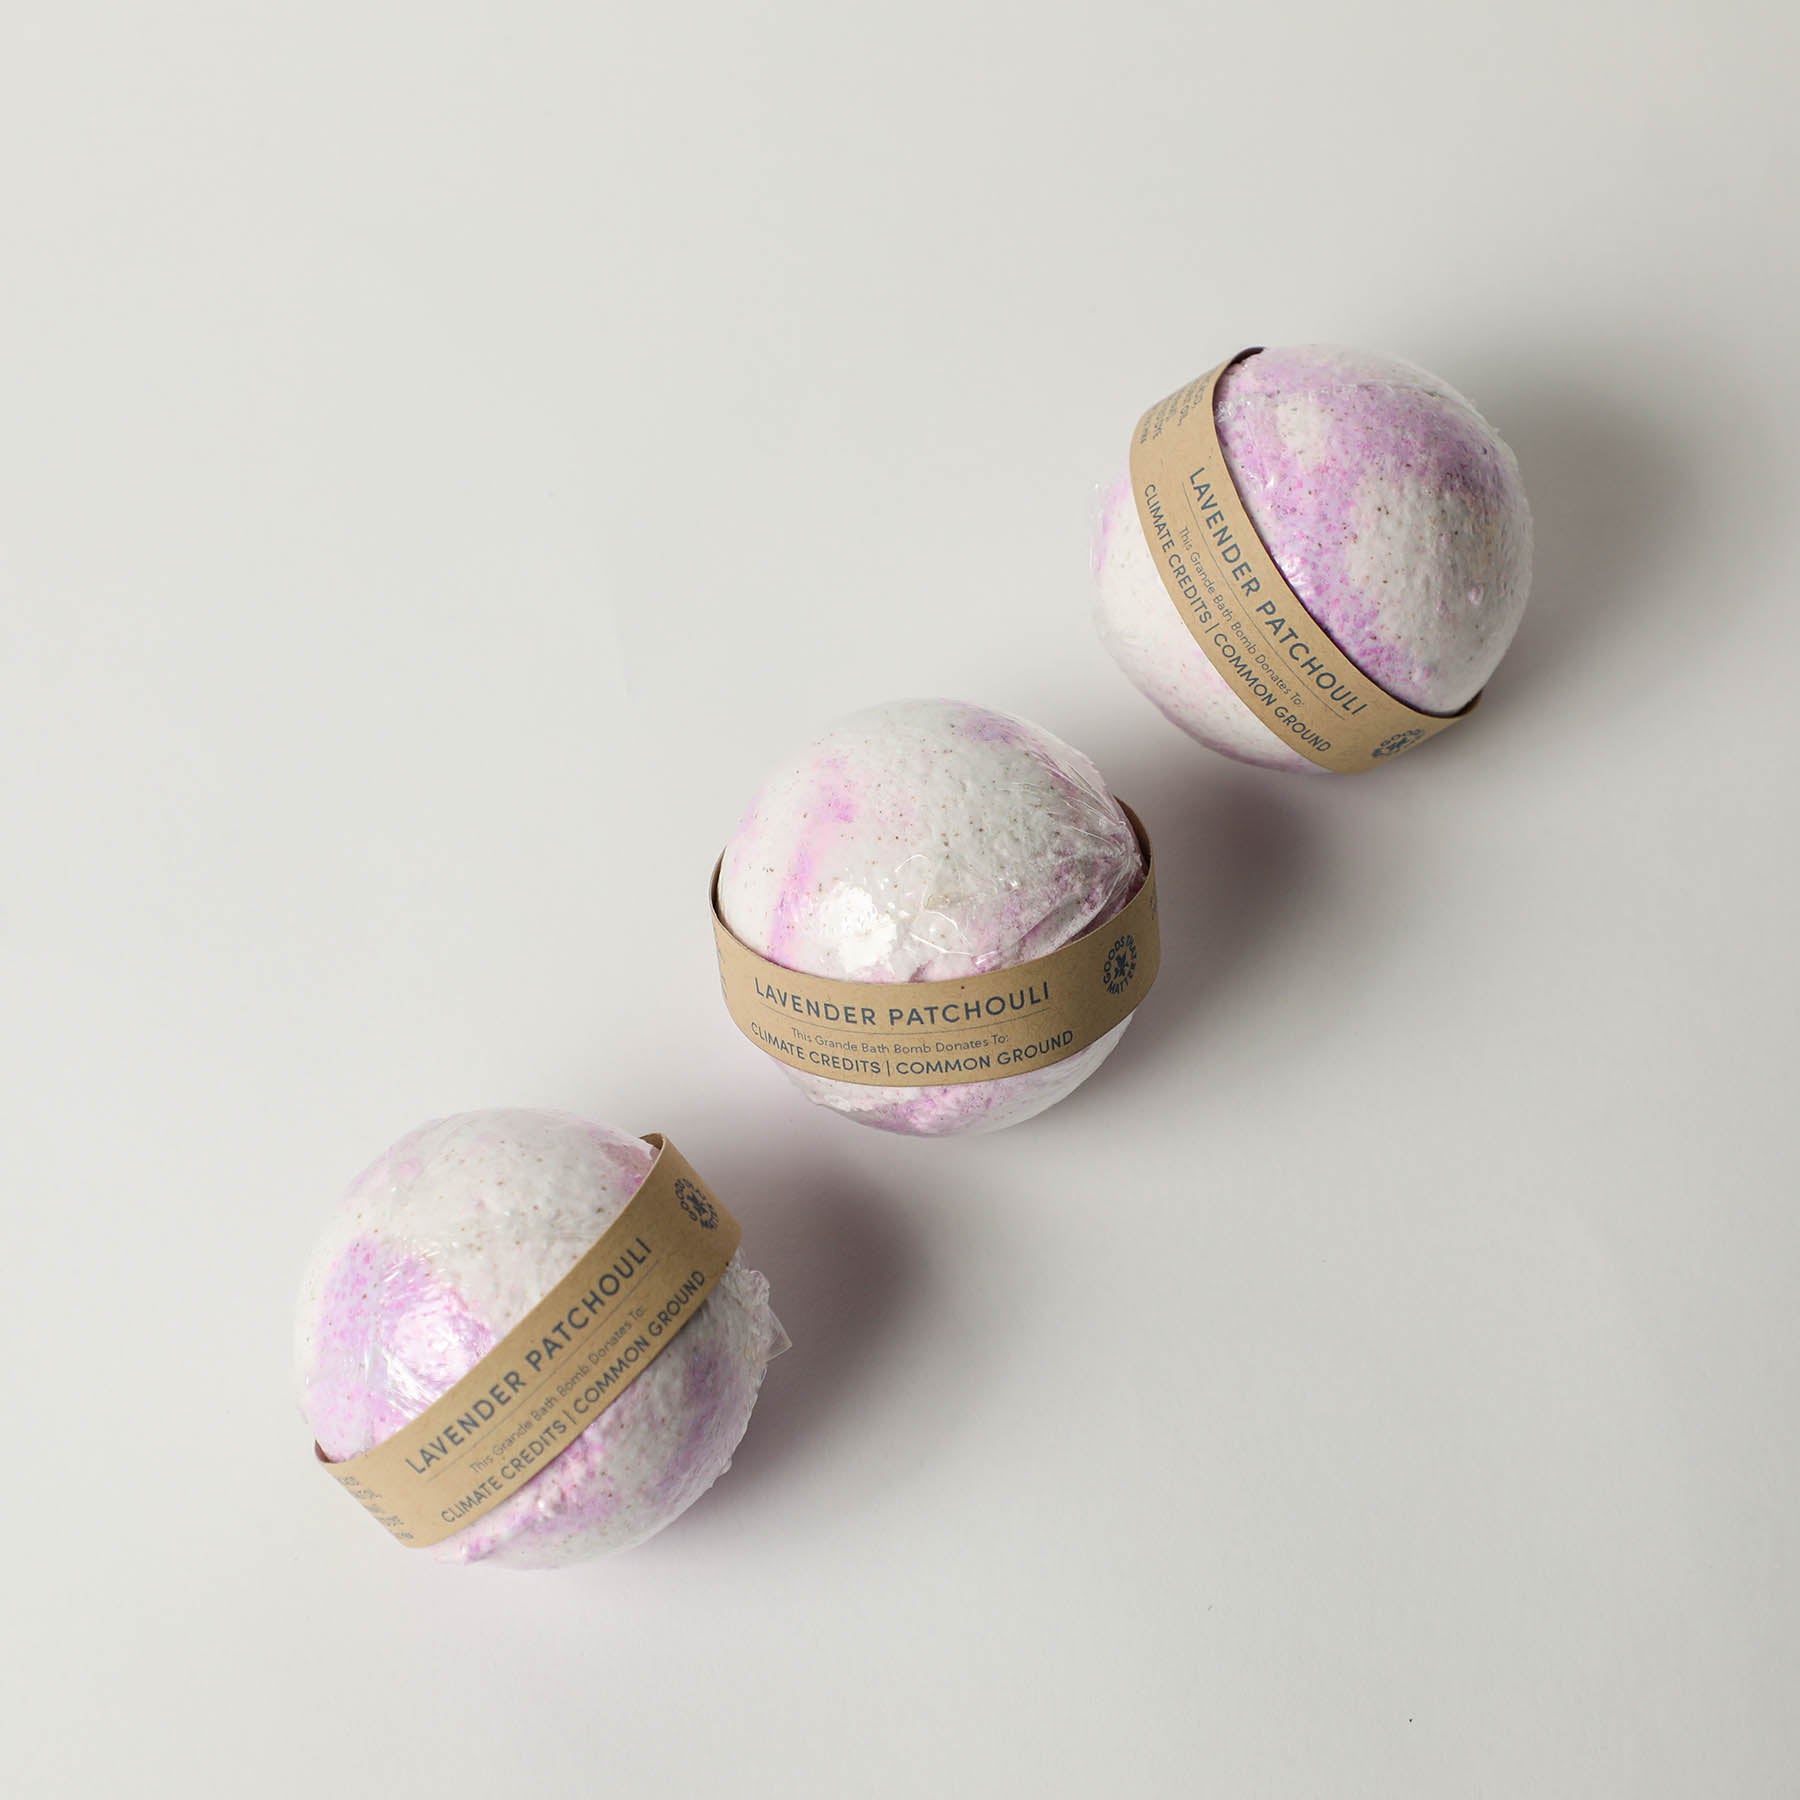 Bath Bombs - Donates to Common Ground Relief, Coastal Climate Credits